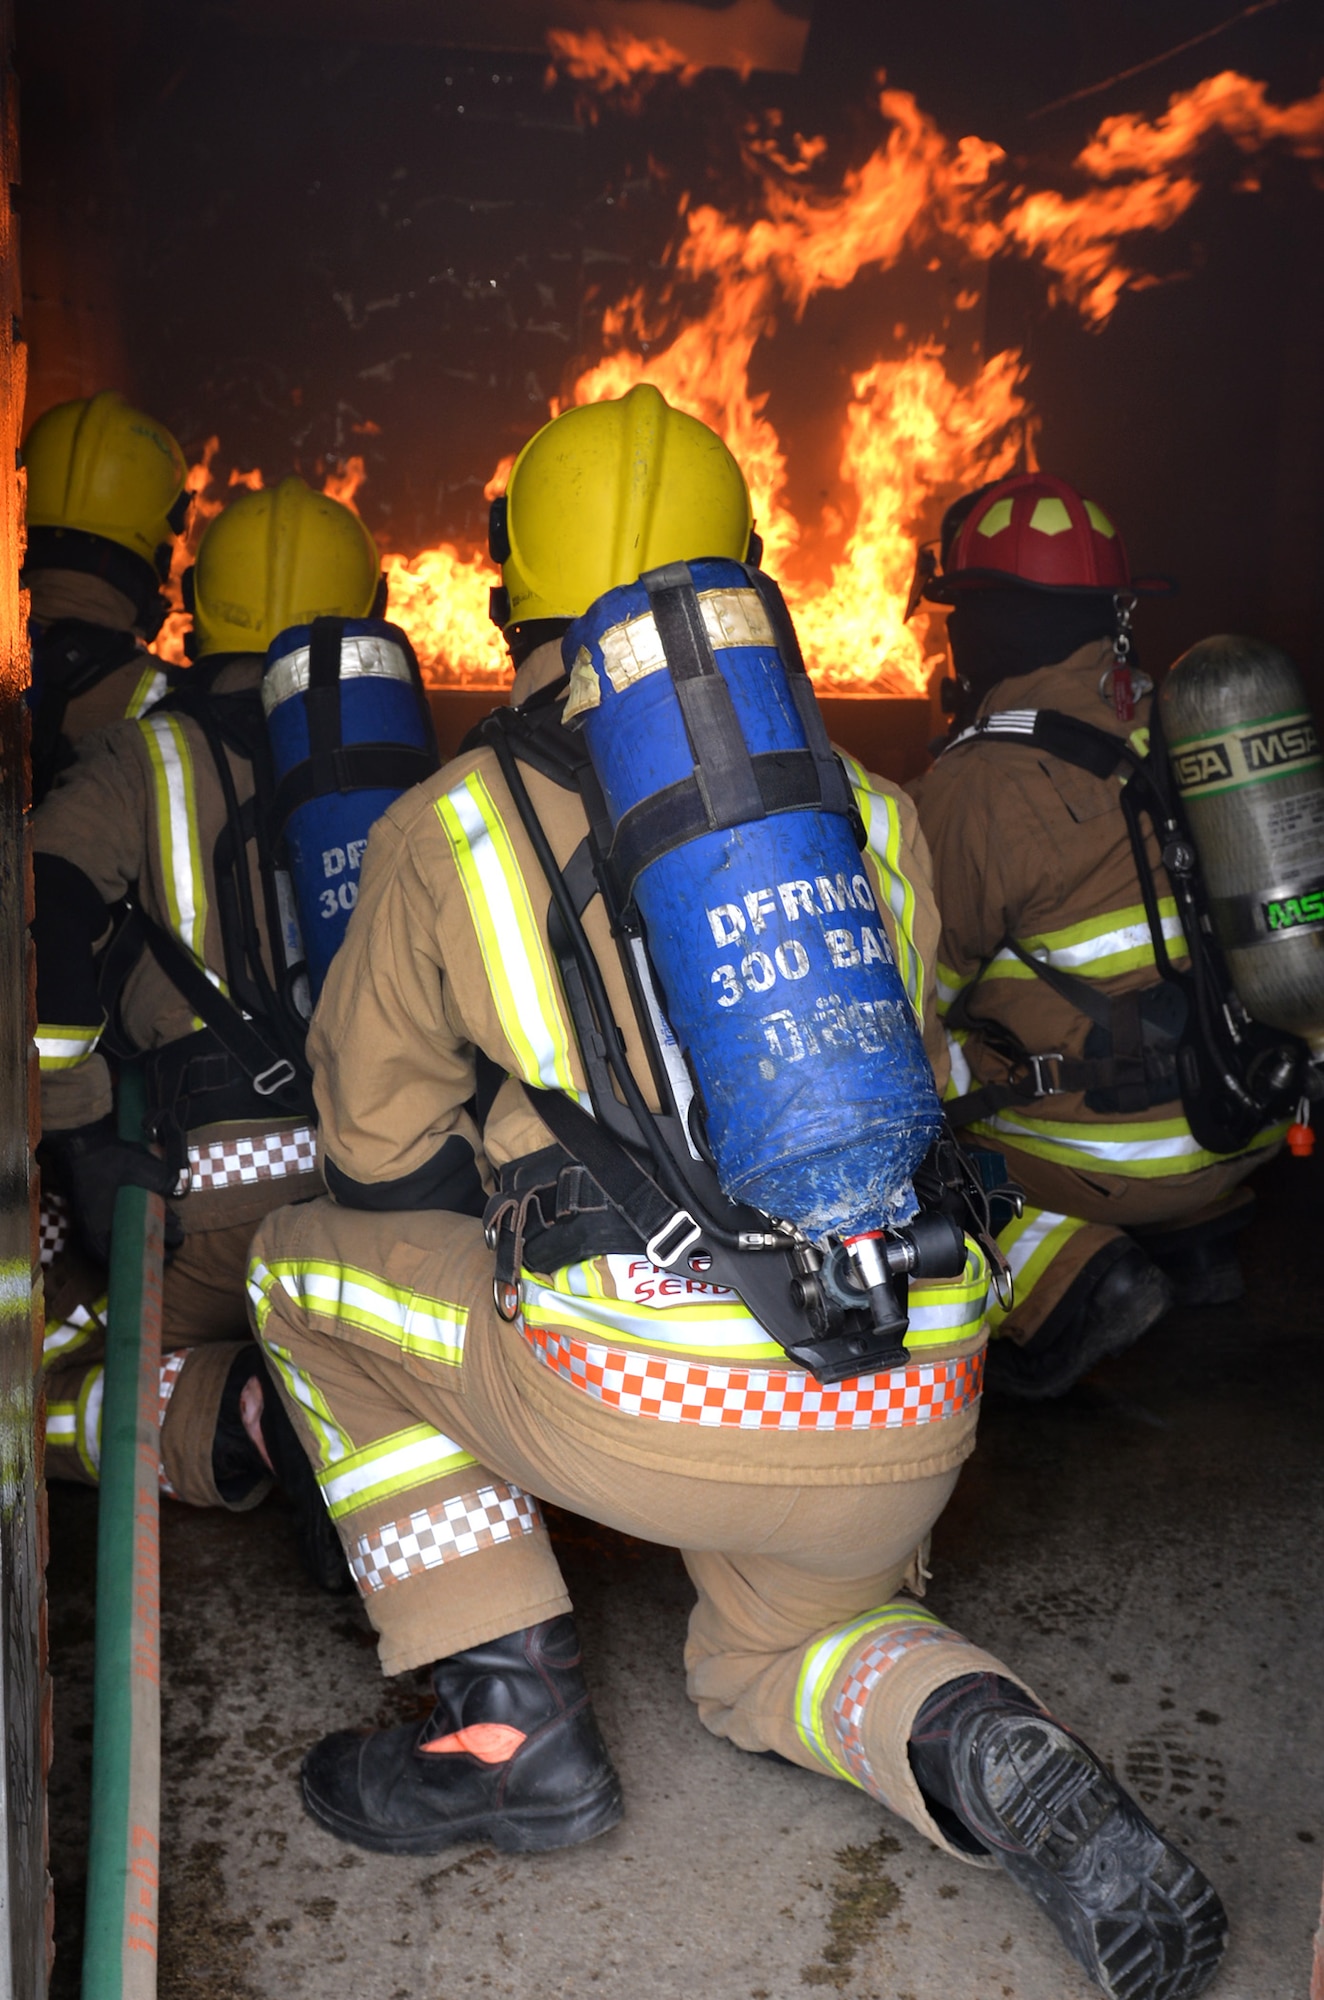 Royal Air Force firefighters from RAF Marham, Norfolk, kneel alongside U.S. Air Force firefighters as they put out flames in the live fire training house on RAF Mildenhall, England, April 5, 2019. The British fire crew visited the base to gain experience on the live fire trainer. With the arrival of the F-35 and the regeneration at RAF Marham, their training facilities are under renovation and the visit served to provide vital training for the RAF firefighters, and aid in continuing to build vital working relationships between RAF Mildenhall and neighboring fire departments. (U.S. Air Force photo by Karen Abeyasekere)